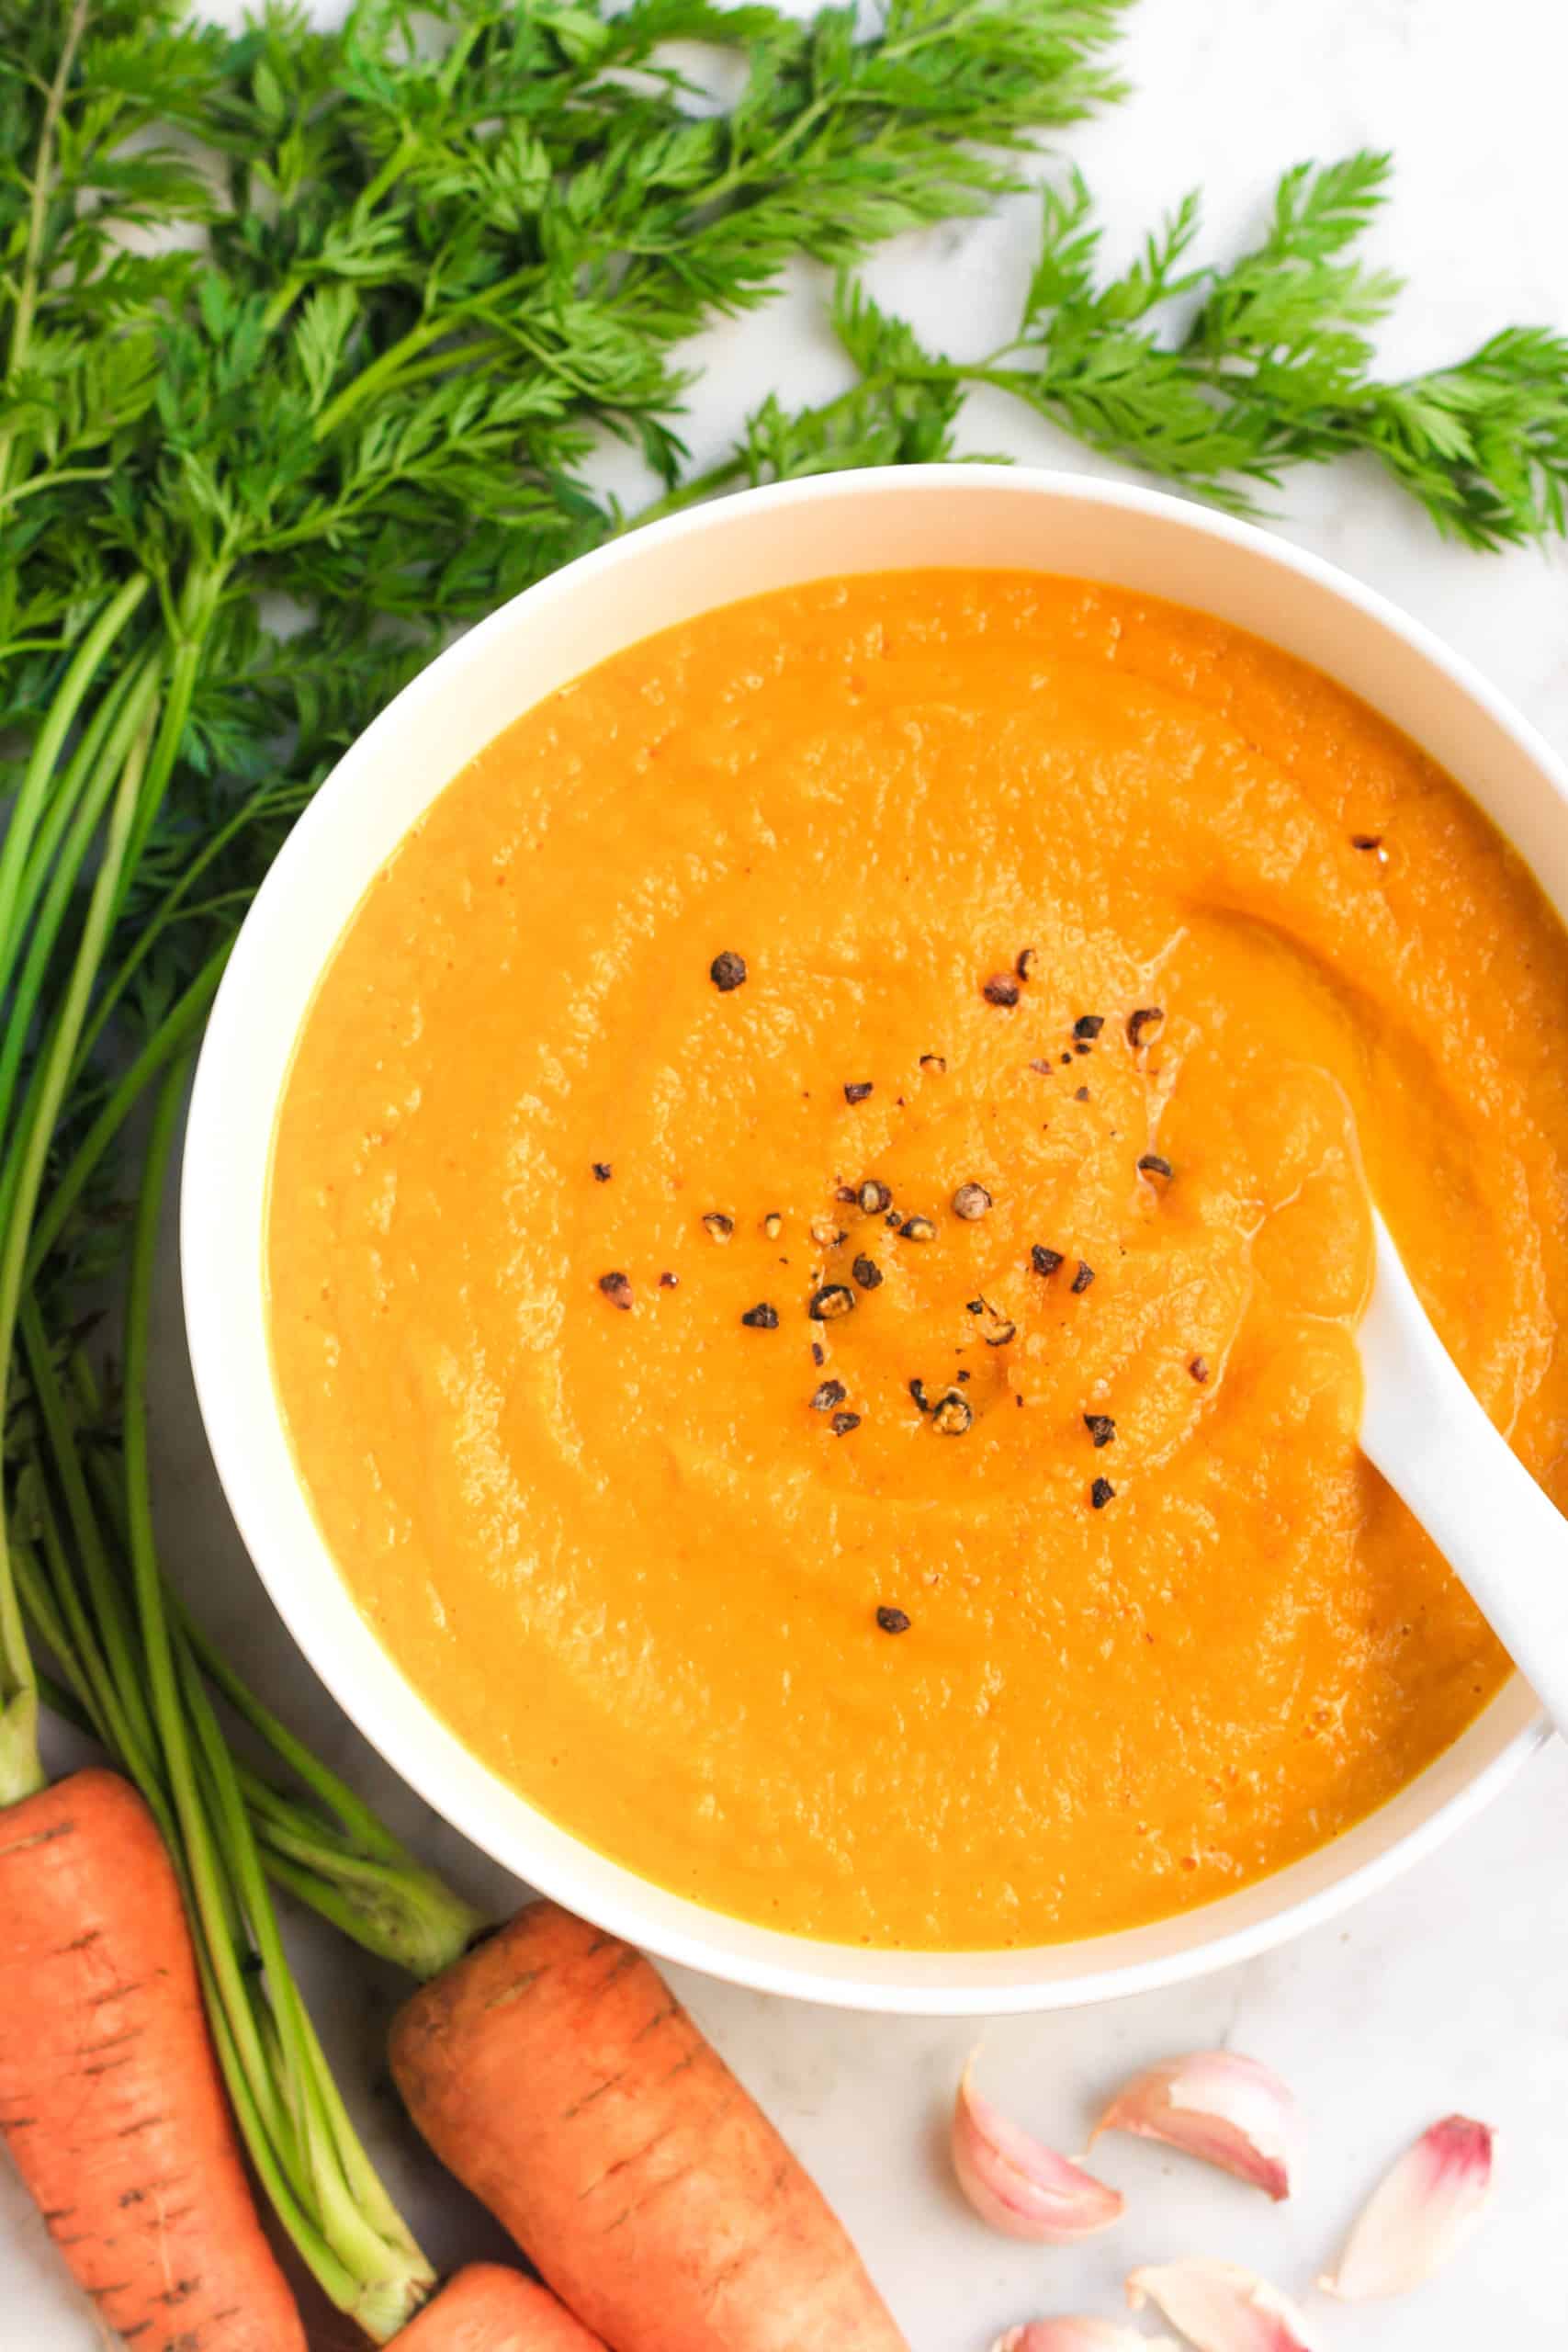 A bowl of cream of carrot soup surrounded by fresh carrots and garlic.